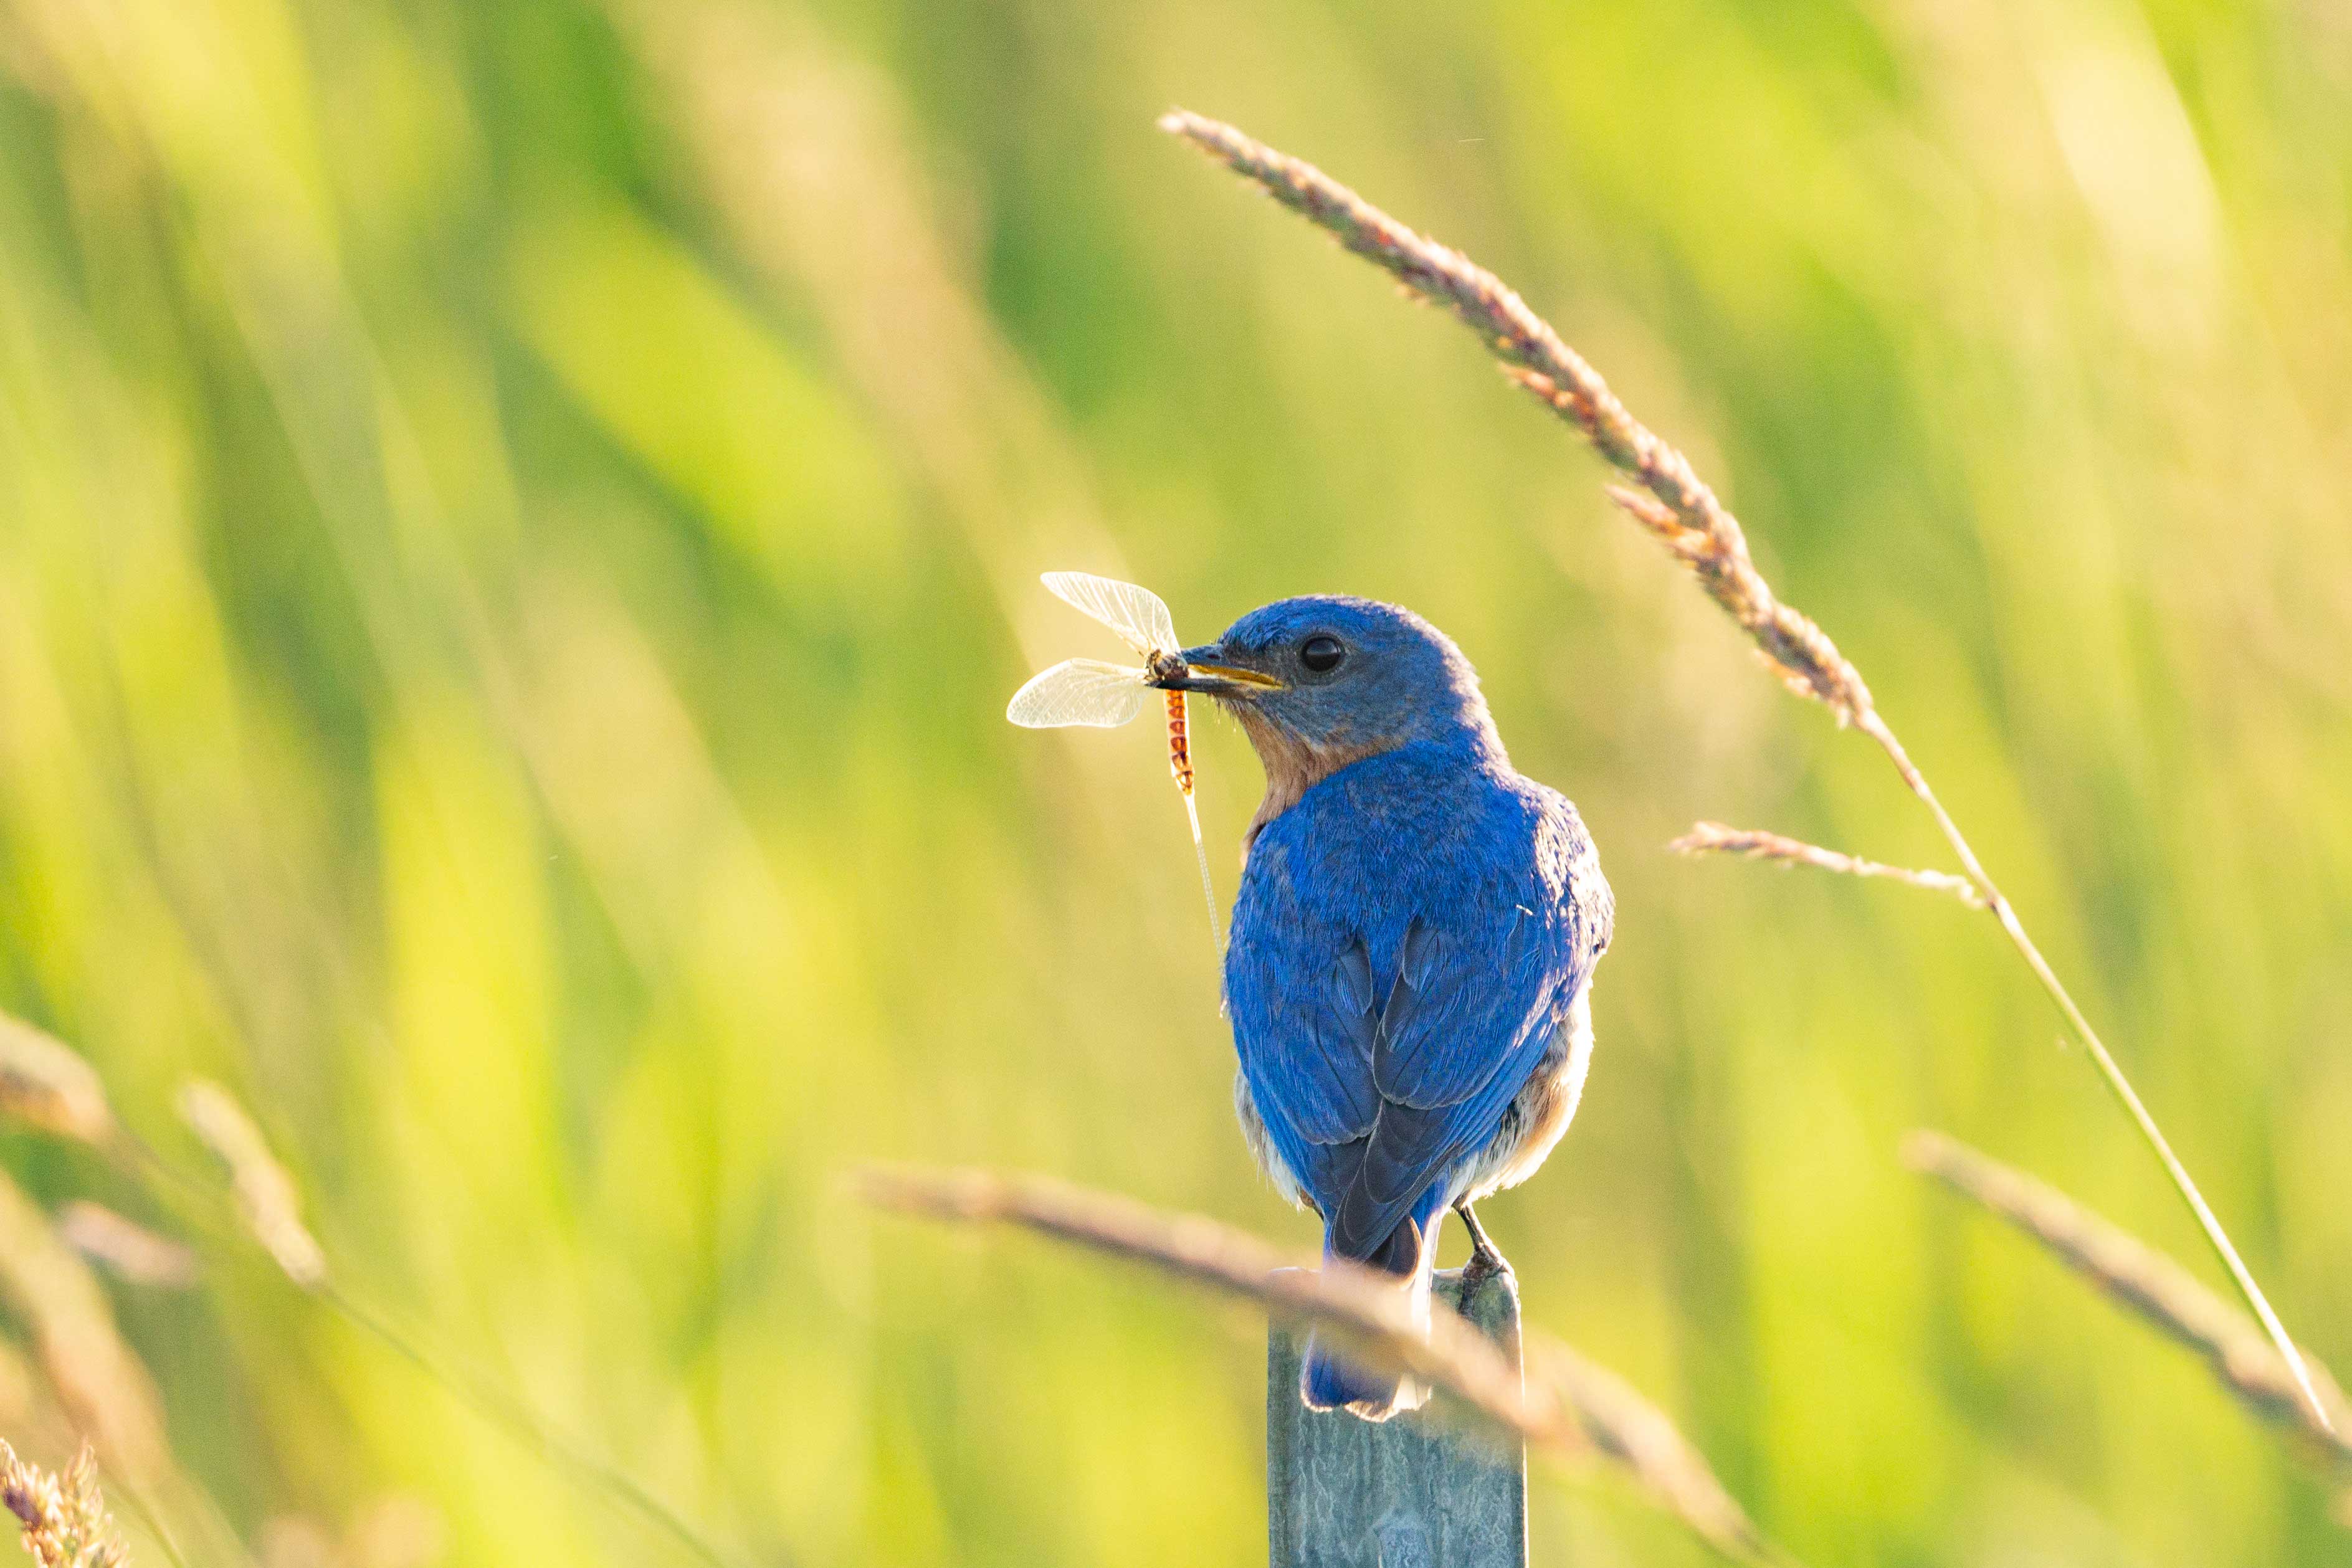 An eastern bluebird with an insect in its mouth.